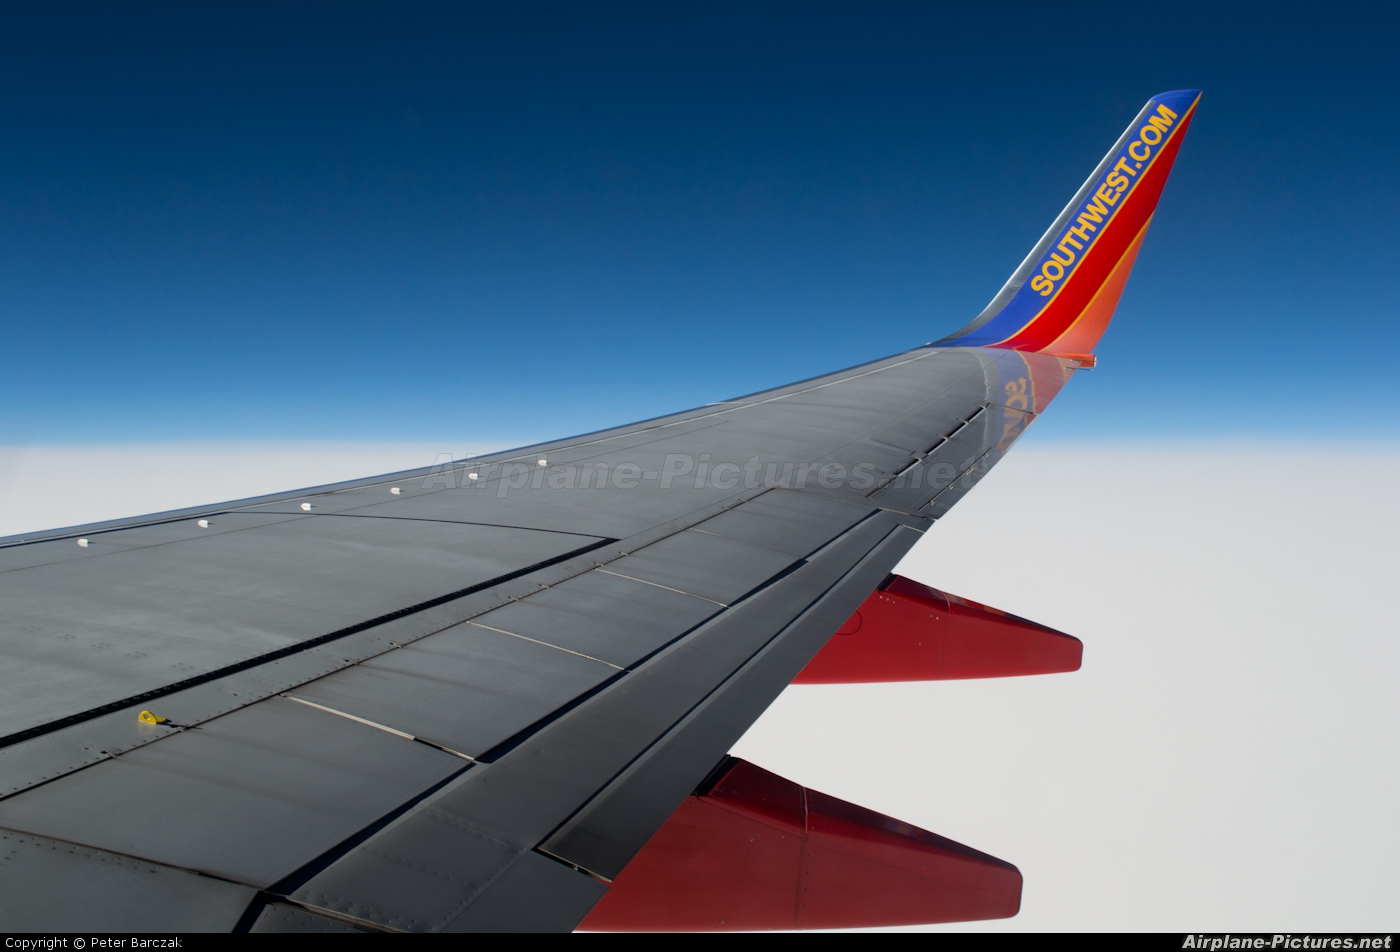 Southwest Airlines - aircraft at In Flight - California